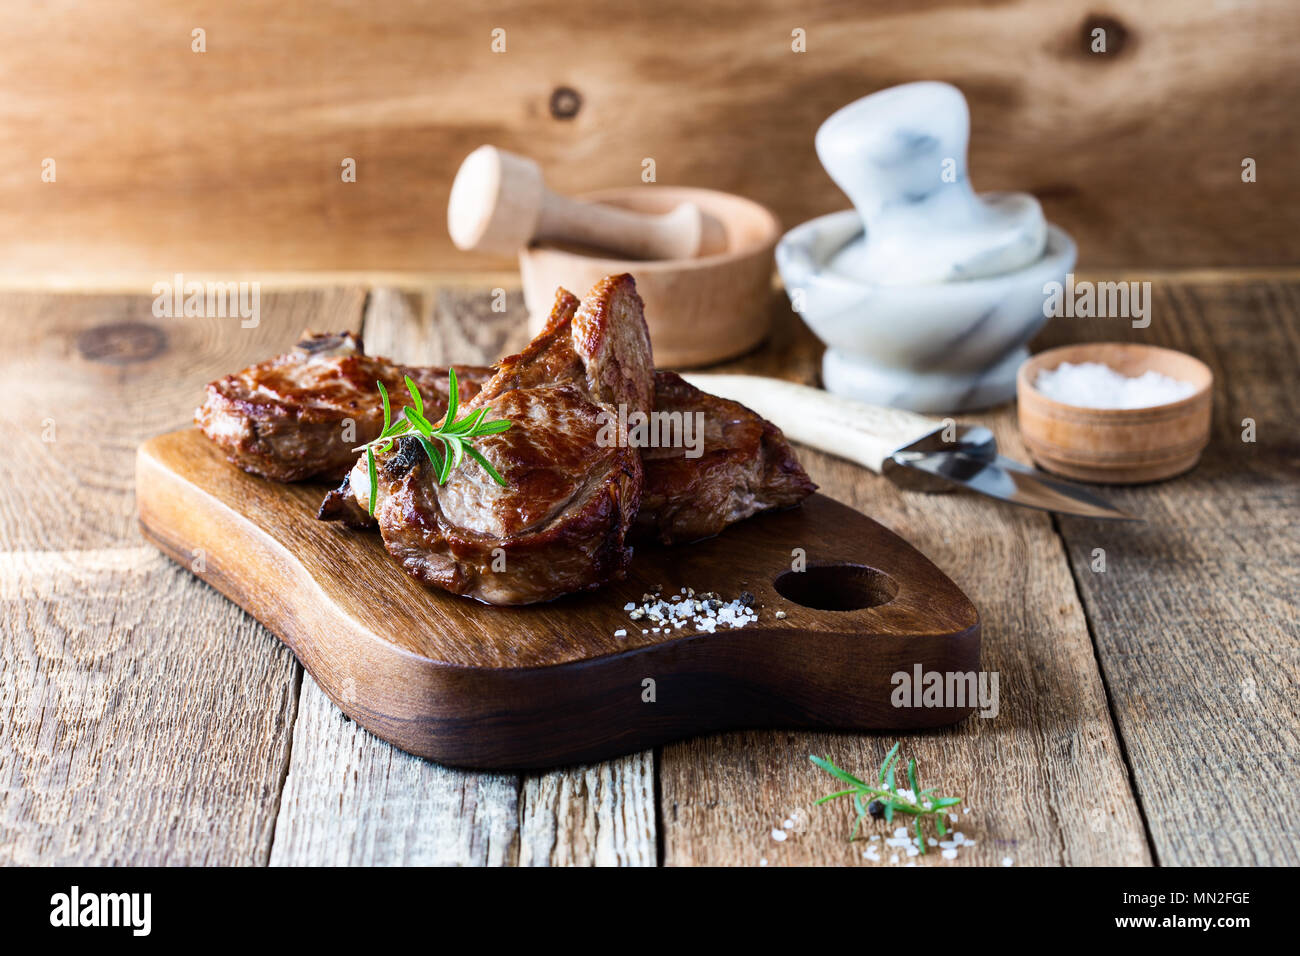 Roasted veal chops with herbs on rustic wooden cutting board, pan seared steak dinner Stock Photo